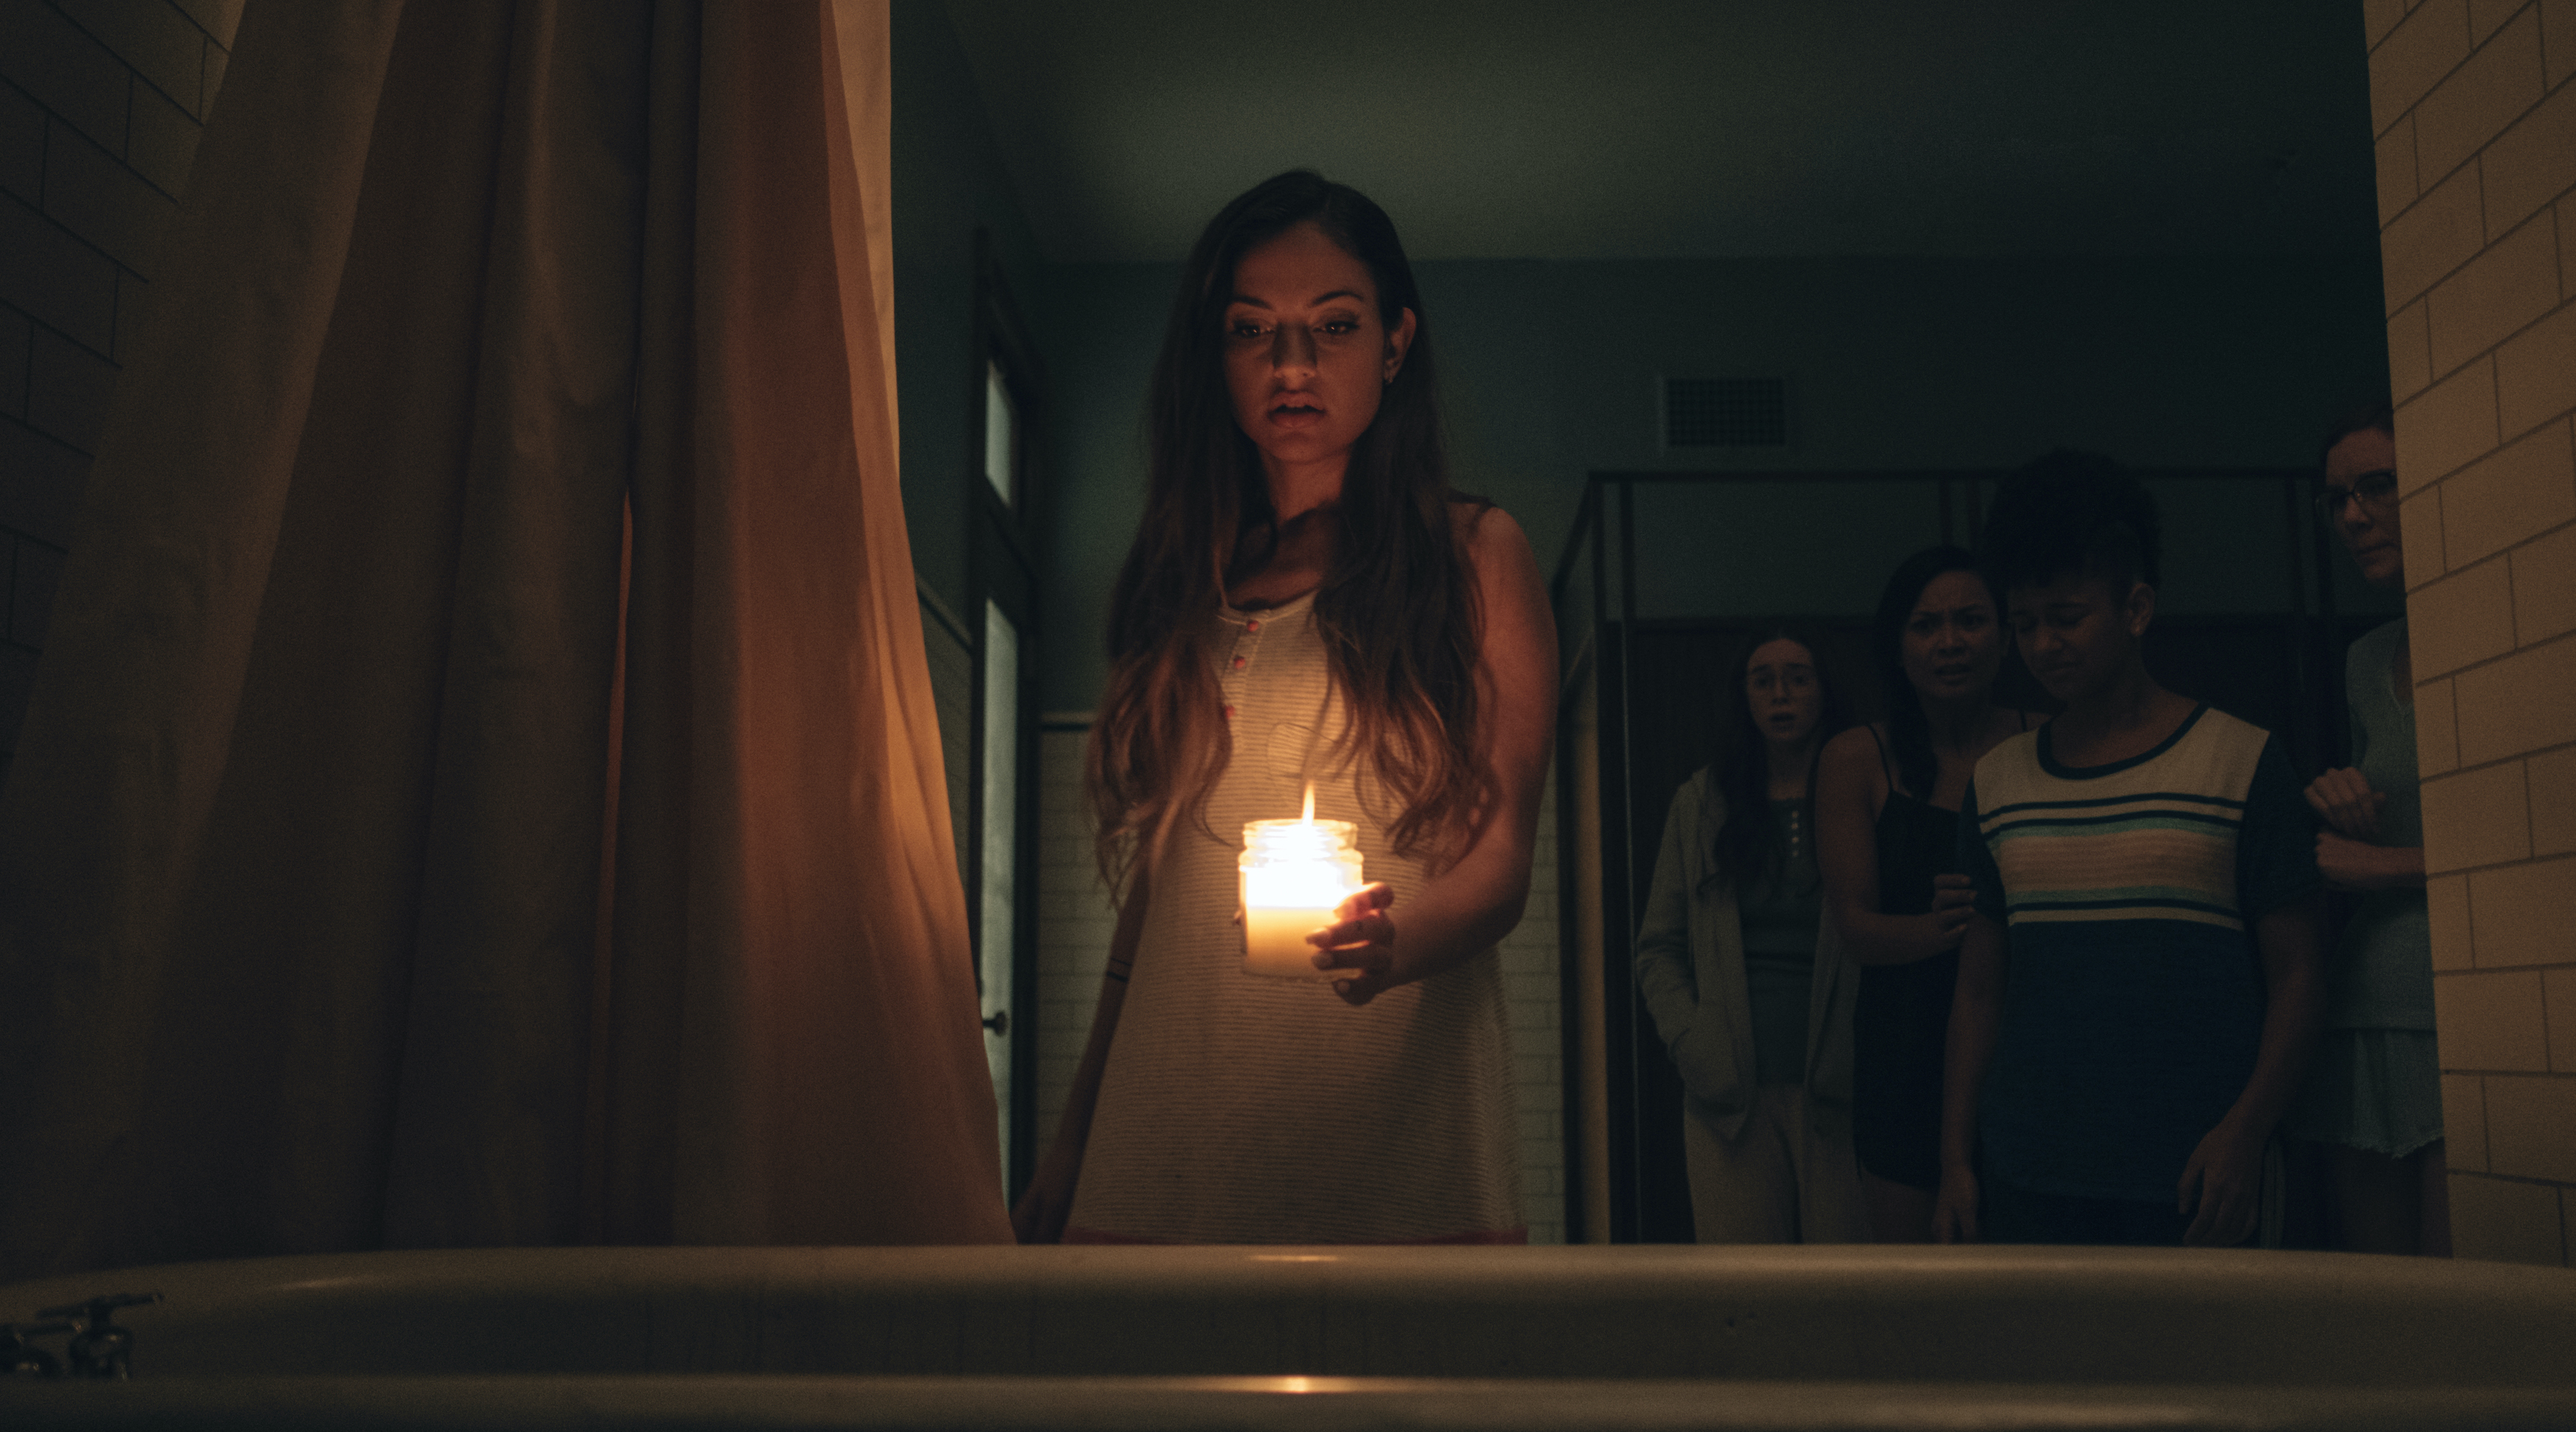 Inanna Sarkis as Alice holds a candle over a bathtub in a darkened bathroom in Seance